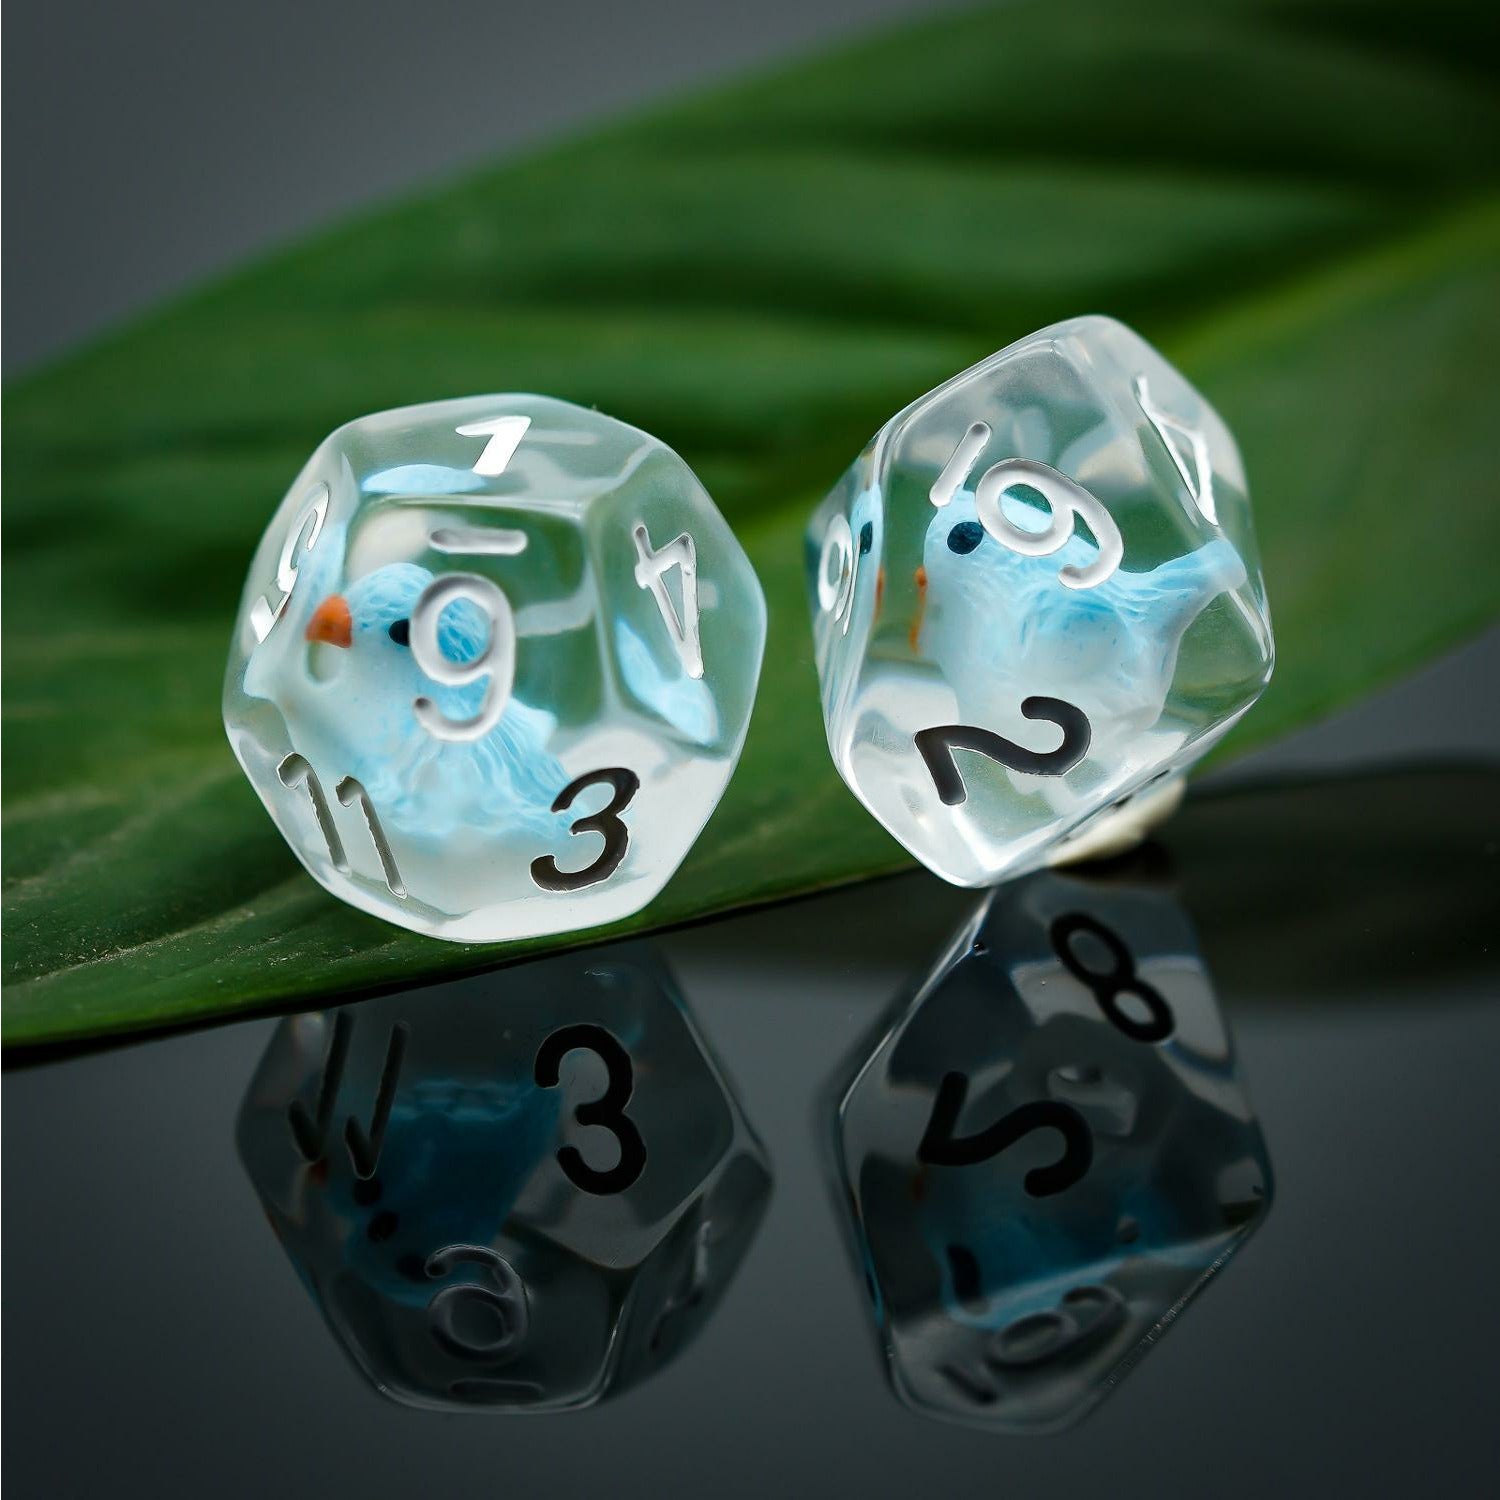 d12 and d10 on leaf background